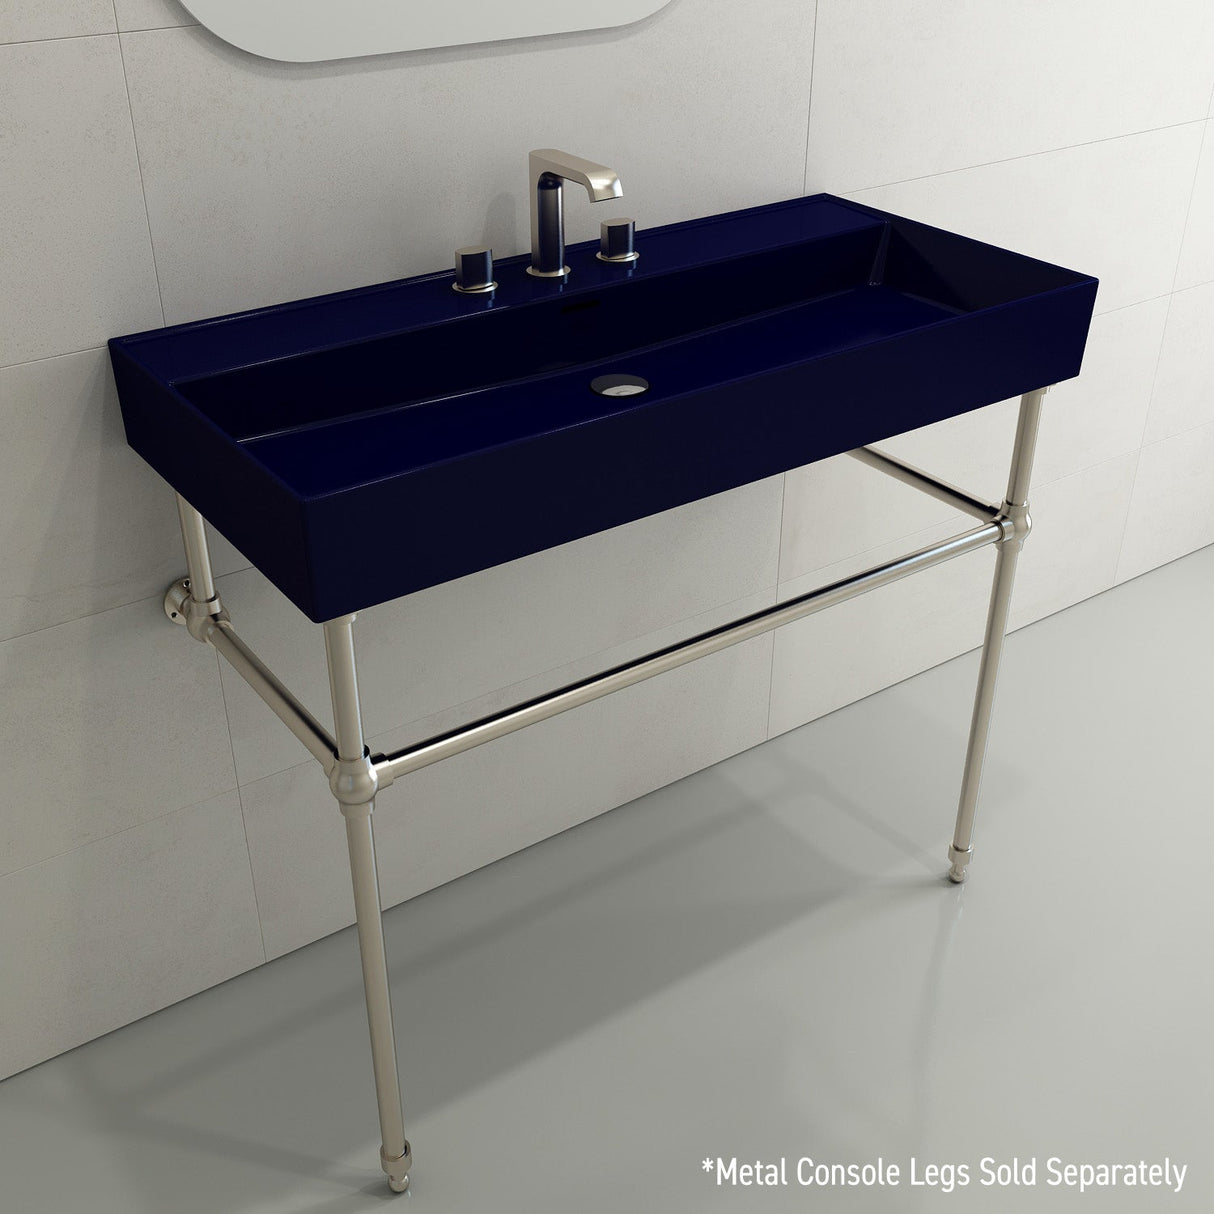 BOCCHI 1378-010-0127 Milano Wall-Mounted Sink Fireclay 39.75 in. 3-Hole with Overflow in Sapphire Blue